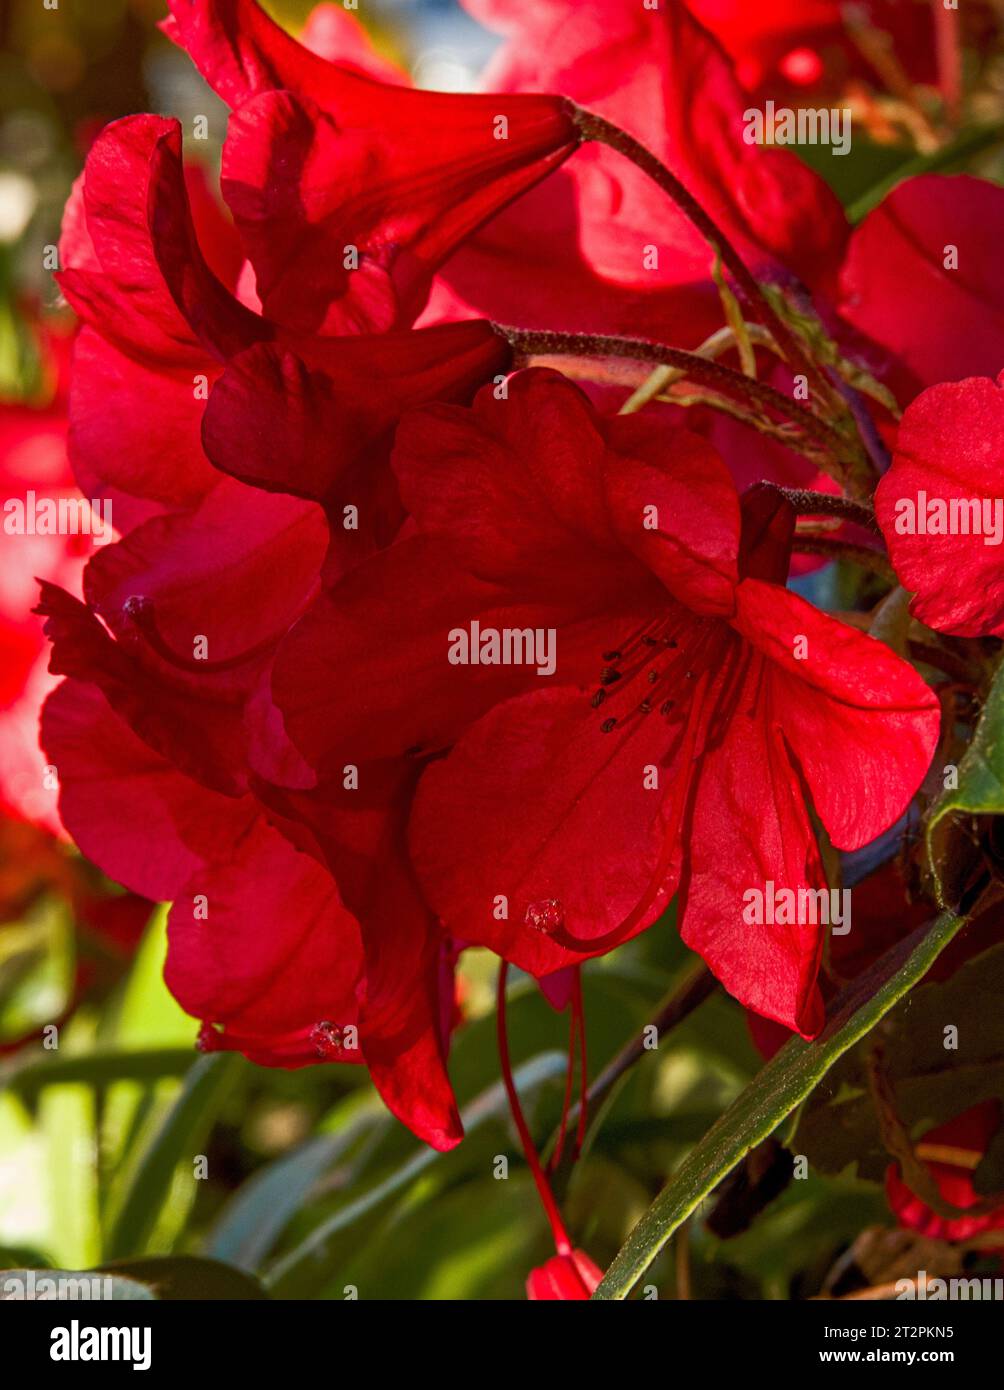 Red Rhododendron growing in low summer sunlight Stock Photo